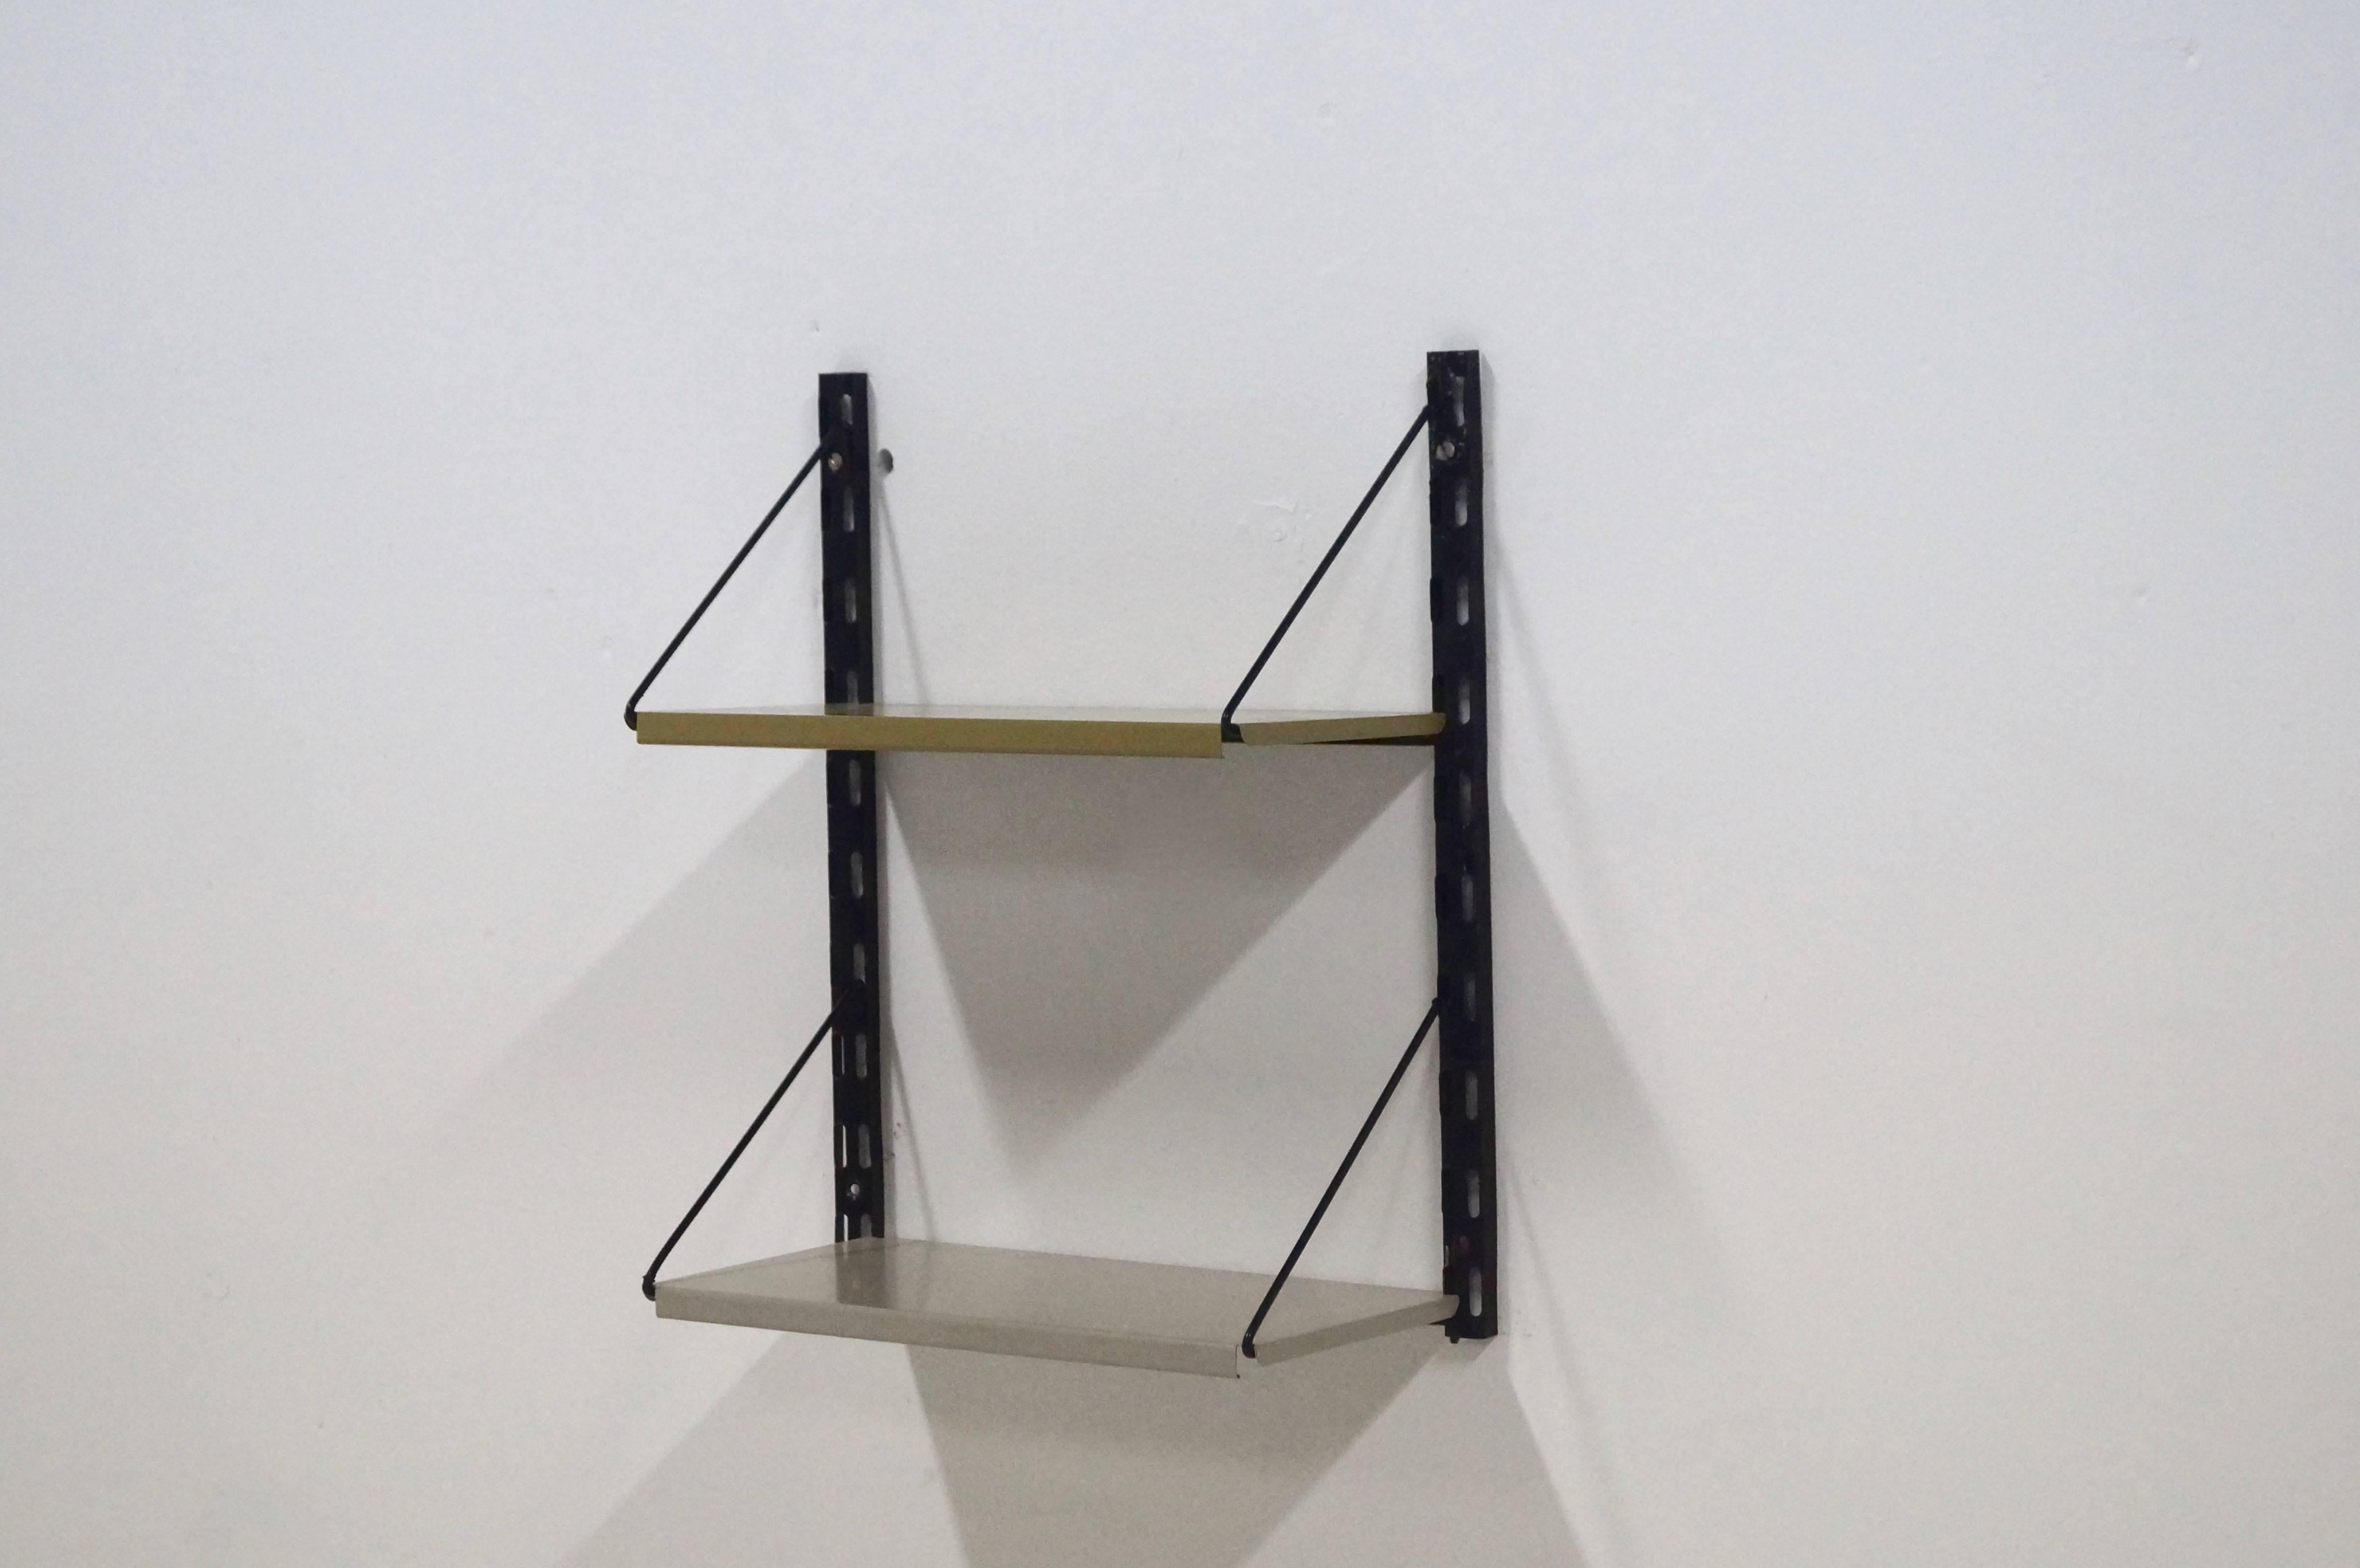 Lacquered Dutch Design Wall Shelving Unit by Tjerk Reijenga for Pilastro, 1950s For Sale